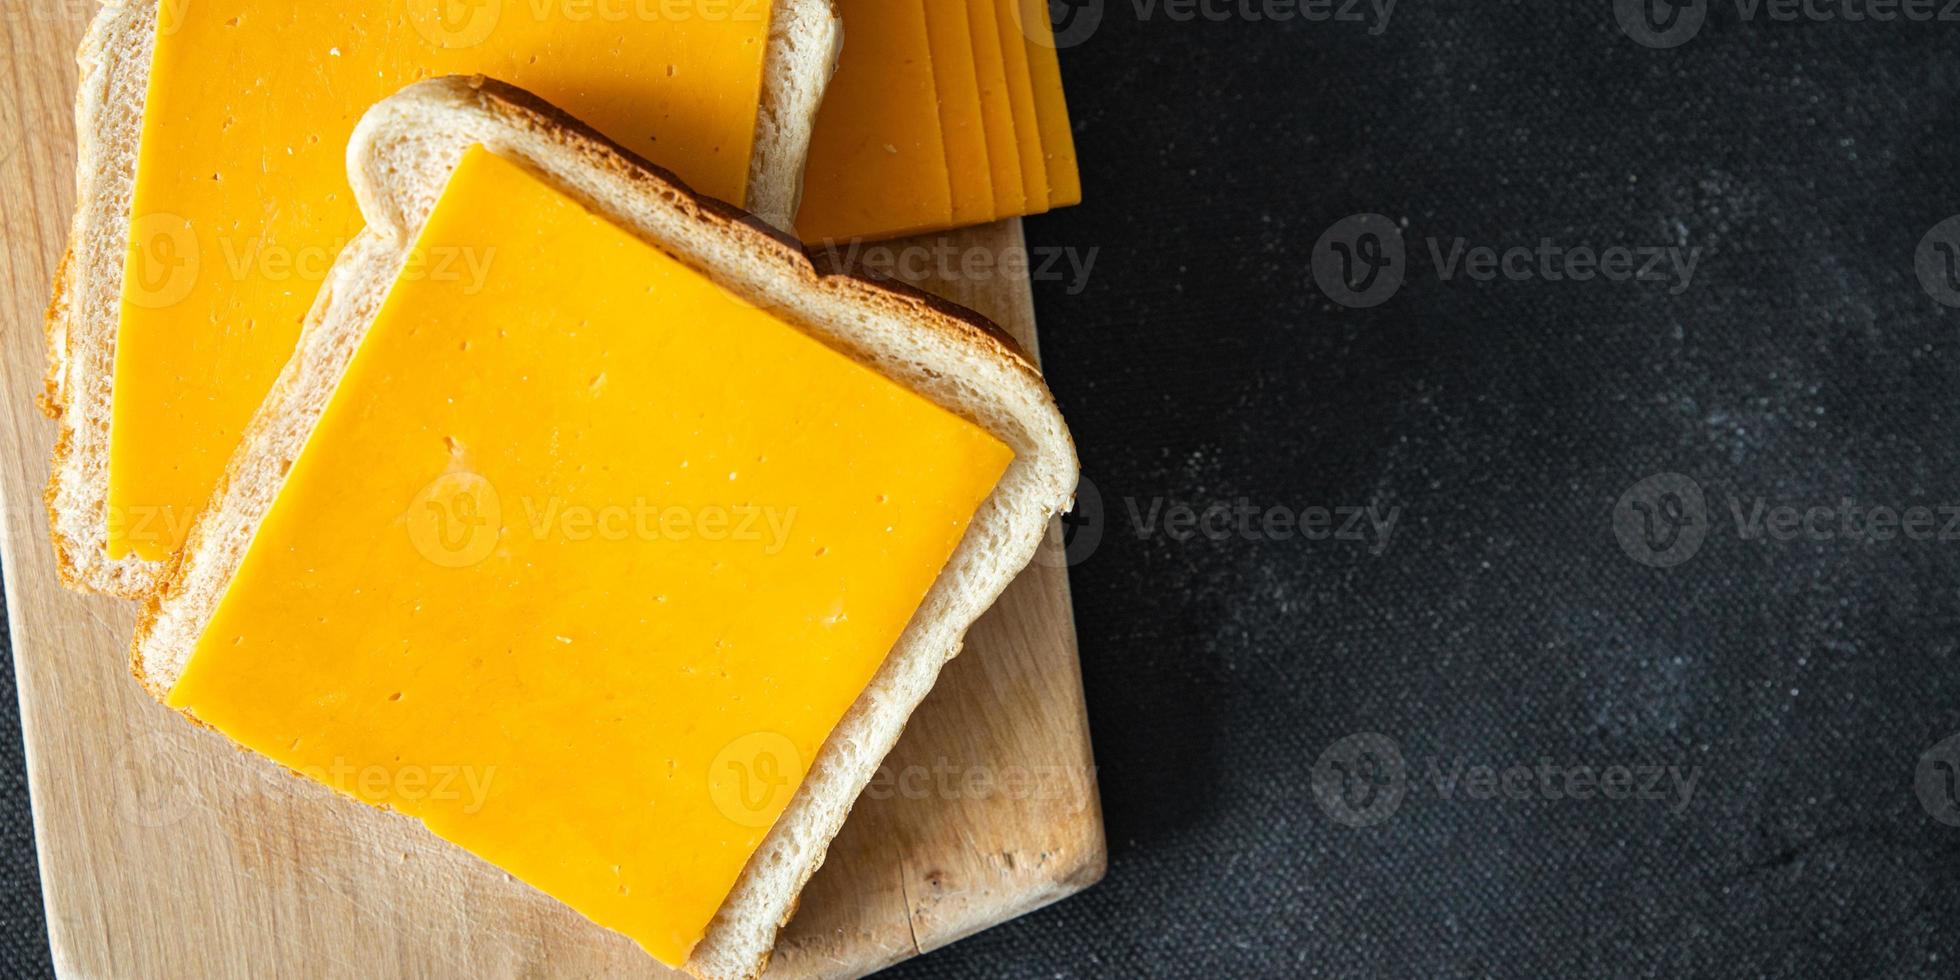 mimolette sandwich cheese cheddar breakfast fresh meal food snack on the table copy space photo